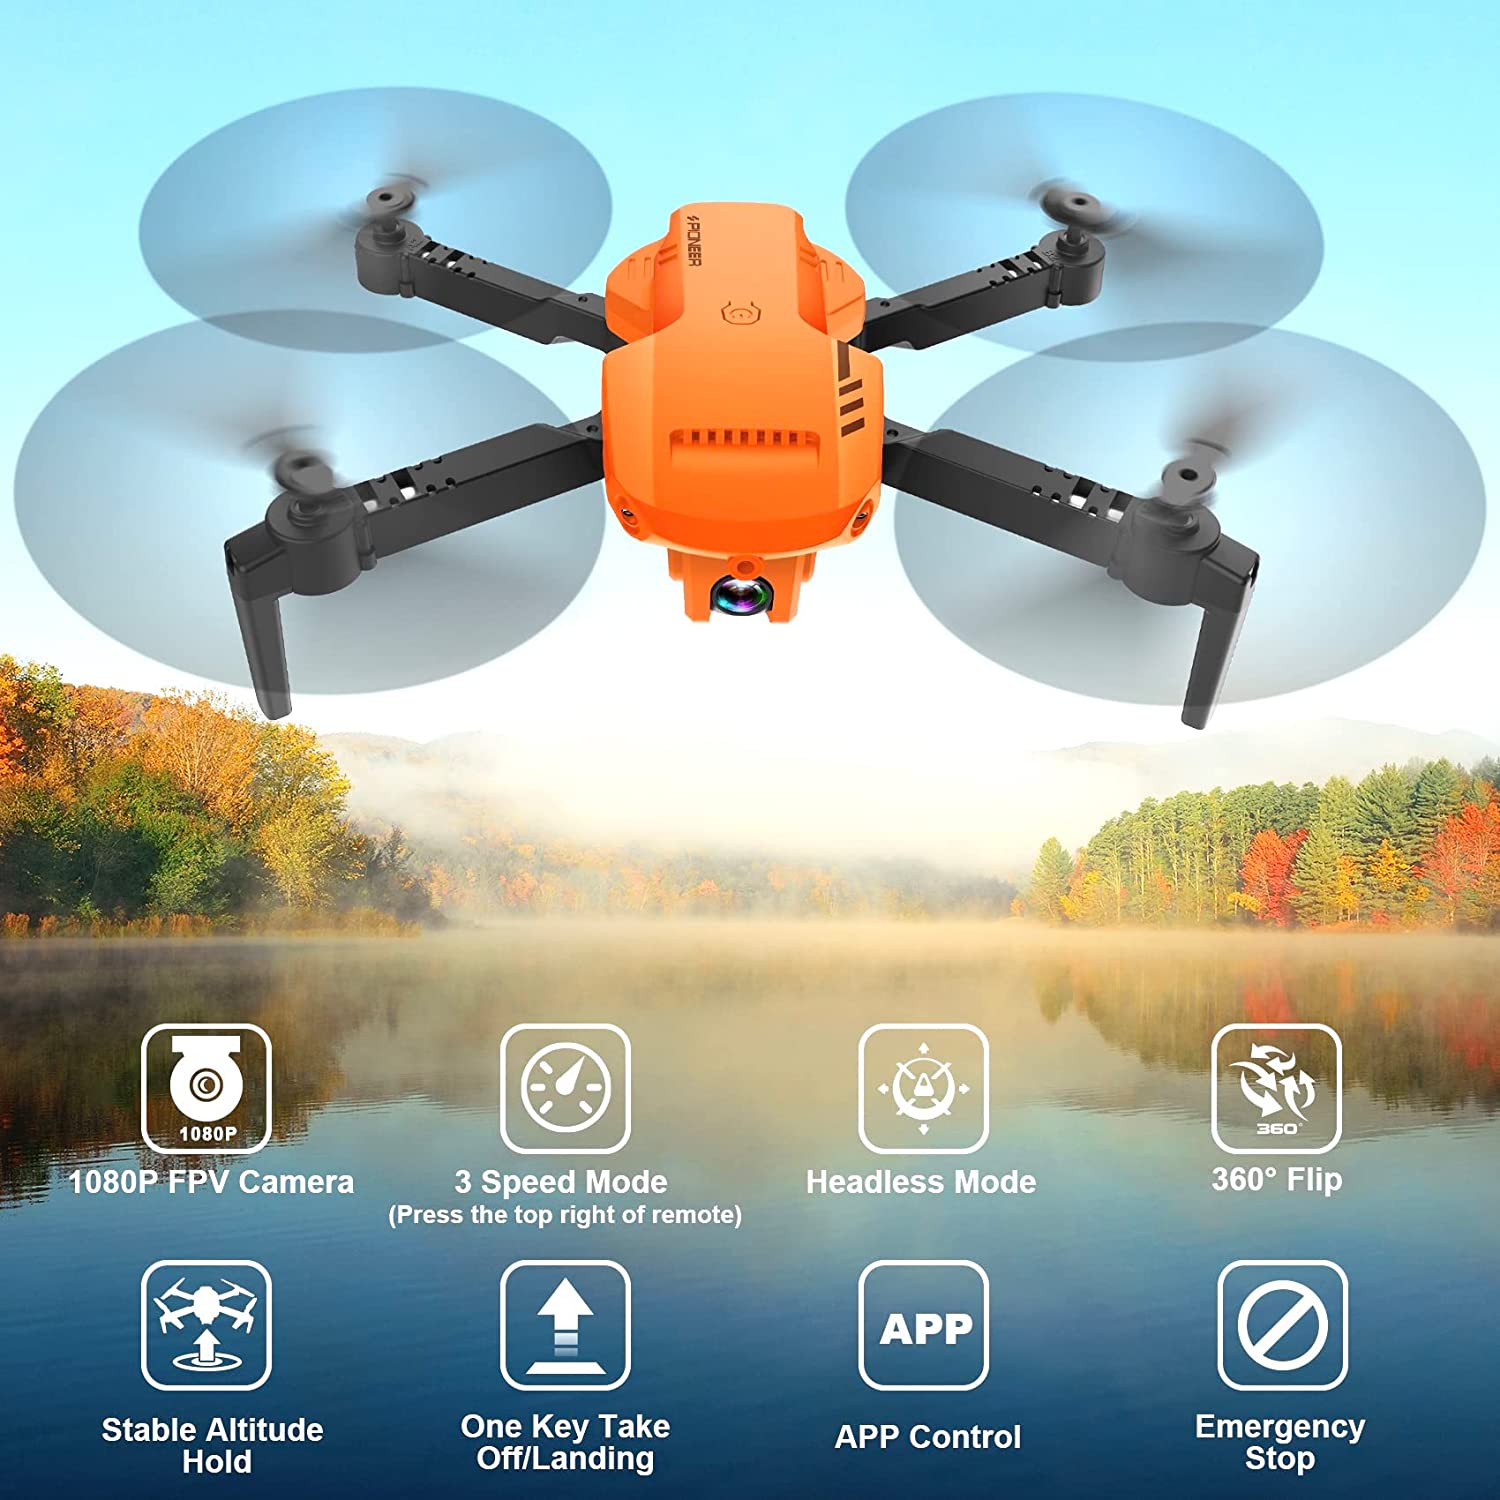 RADCLO Mini Drone with Camera - 1080P HD FPV Foldable Drone with Carrying Situation, 2 Batteries, 90° Adjustable Lens, One Key Take Off/Land, Altitude Hold, 360° Flip, Toys Gifts for Kids, Adults, beginners, Remote Controlled, Black